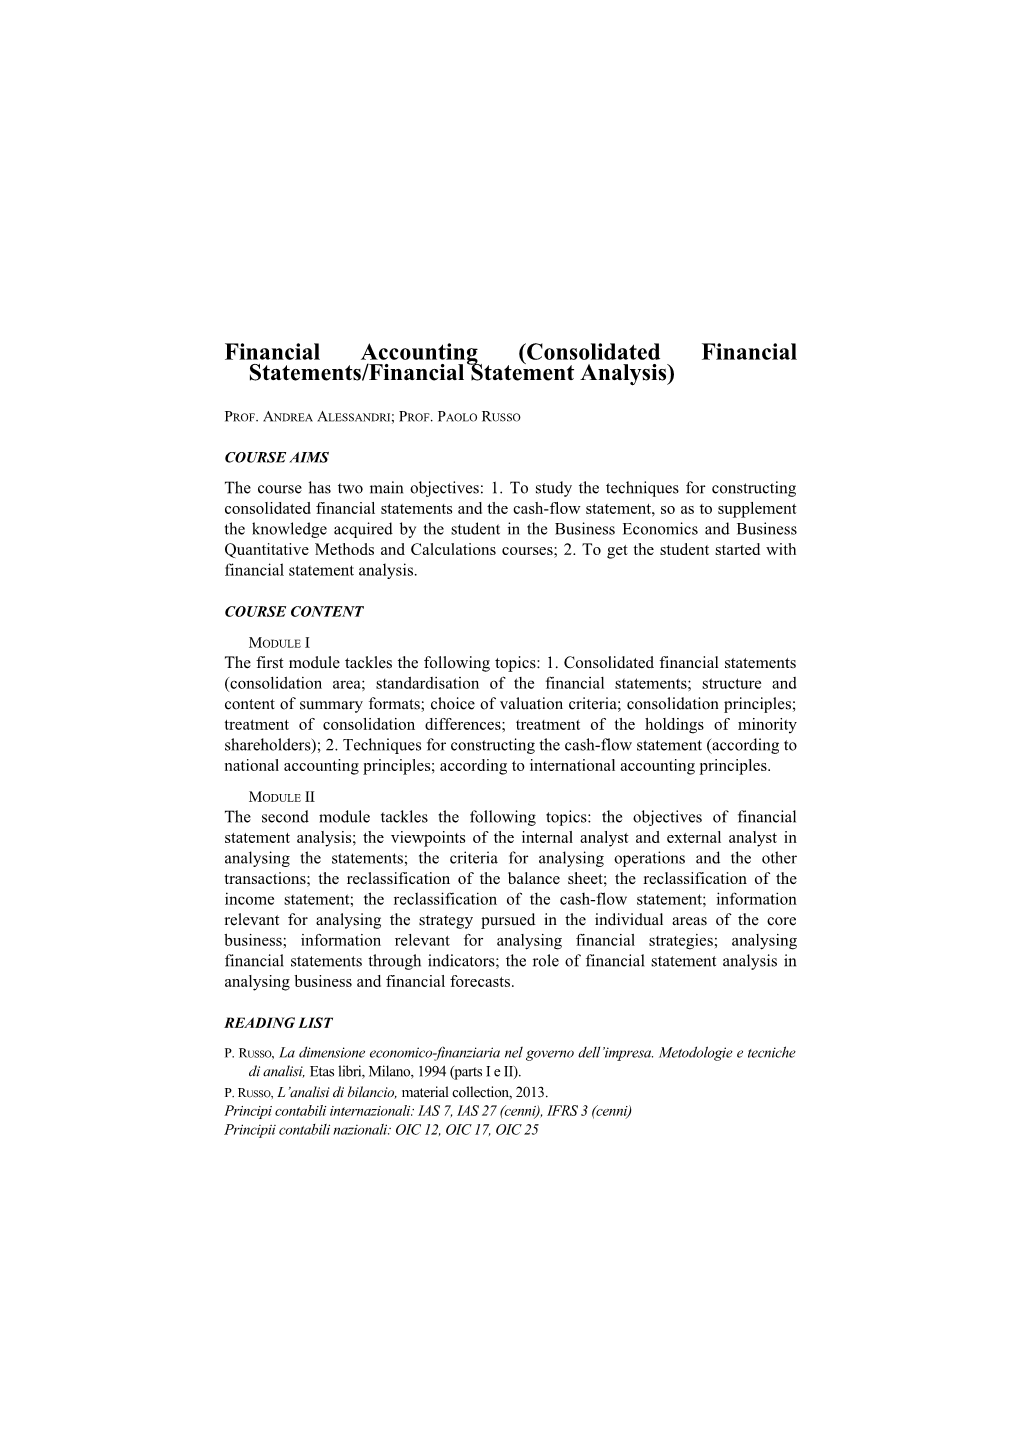 Financial Accounting(Consolidated Financial Statements/Financial Statement Analysis)